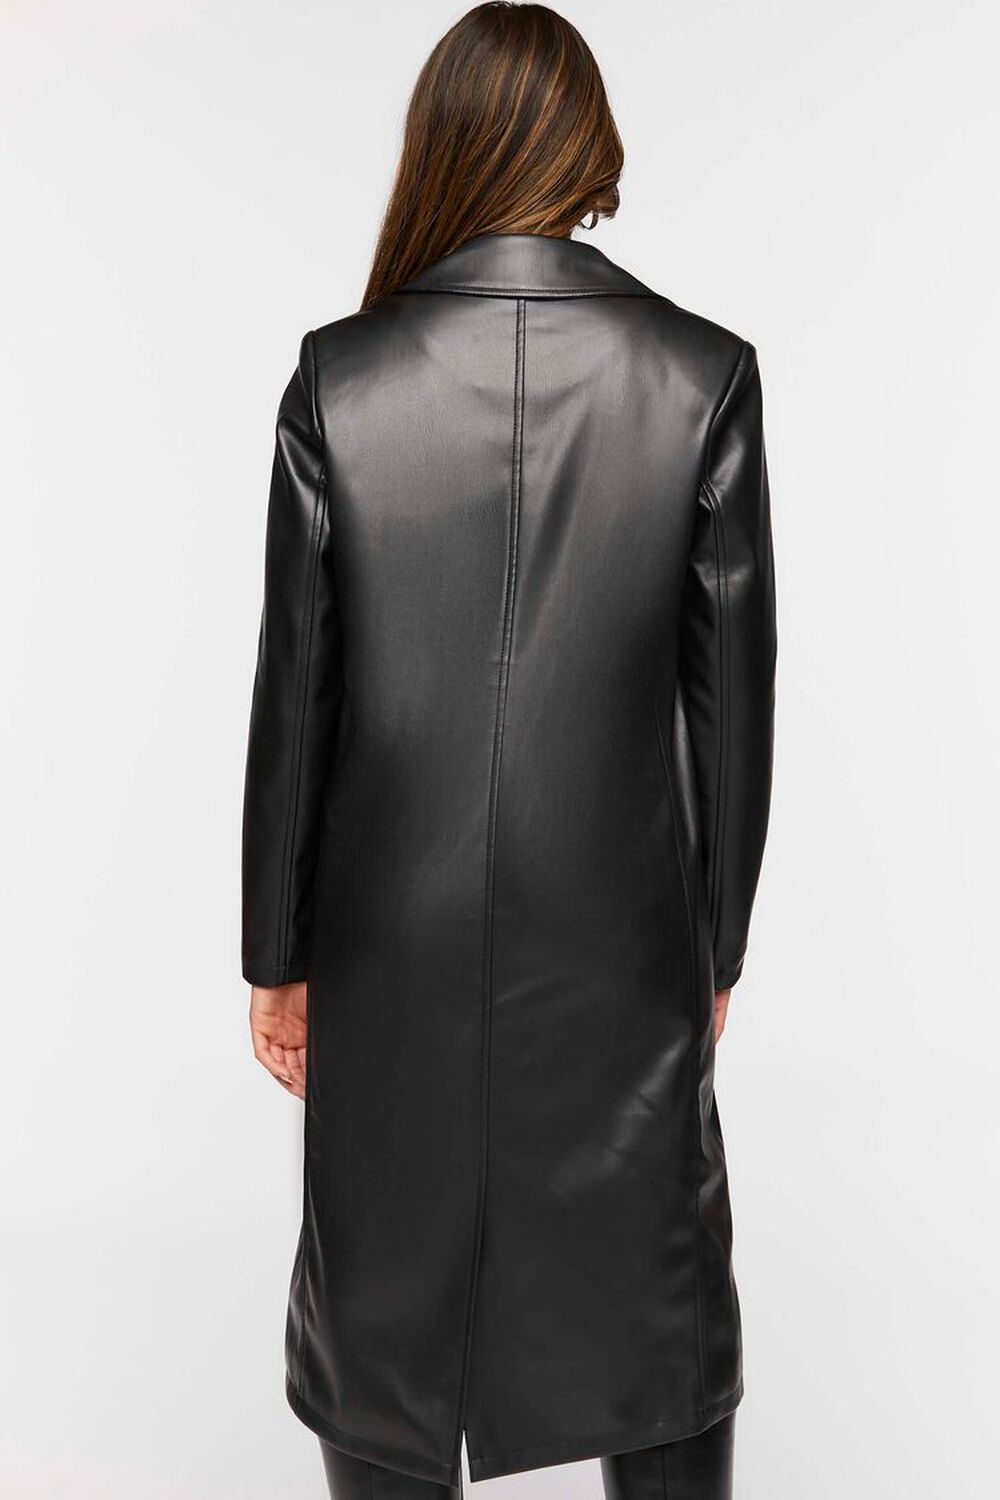 BLACK Faux Leather Trench Coat, image 3